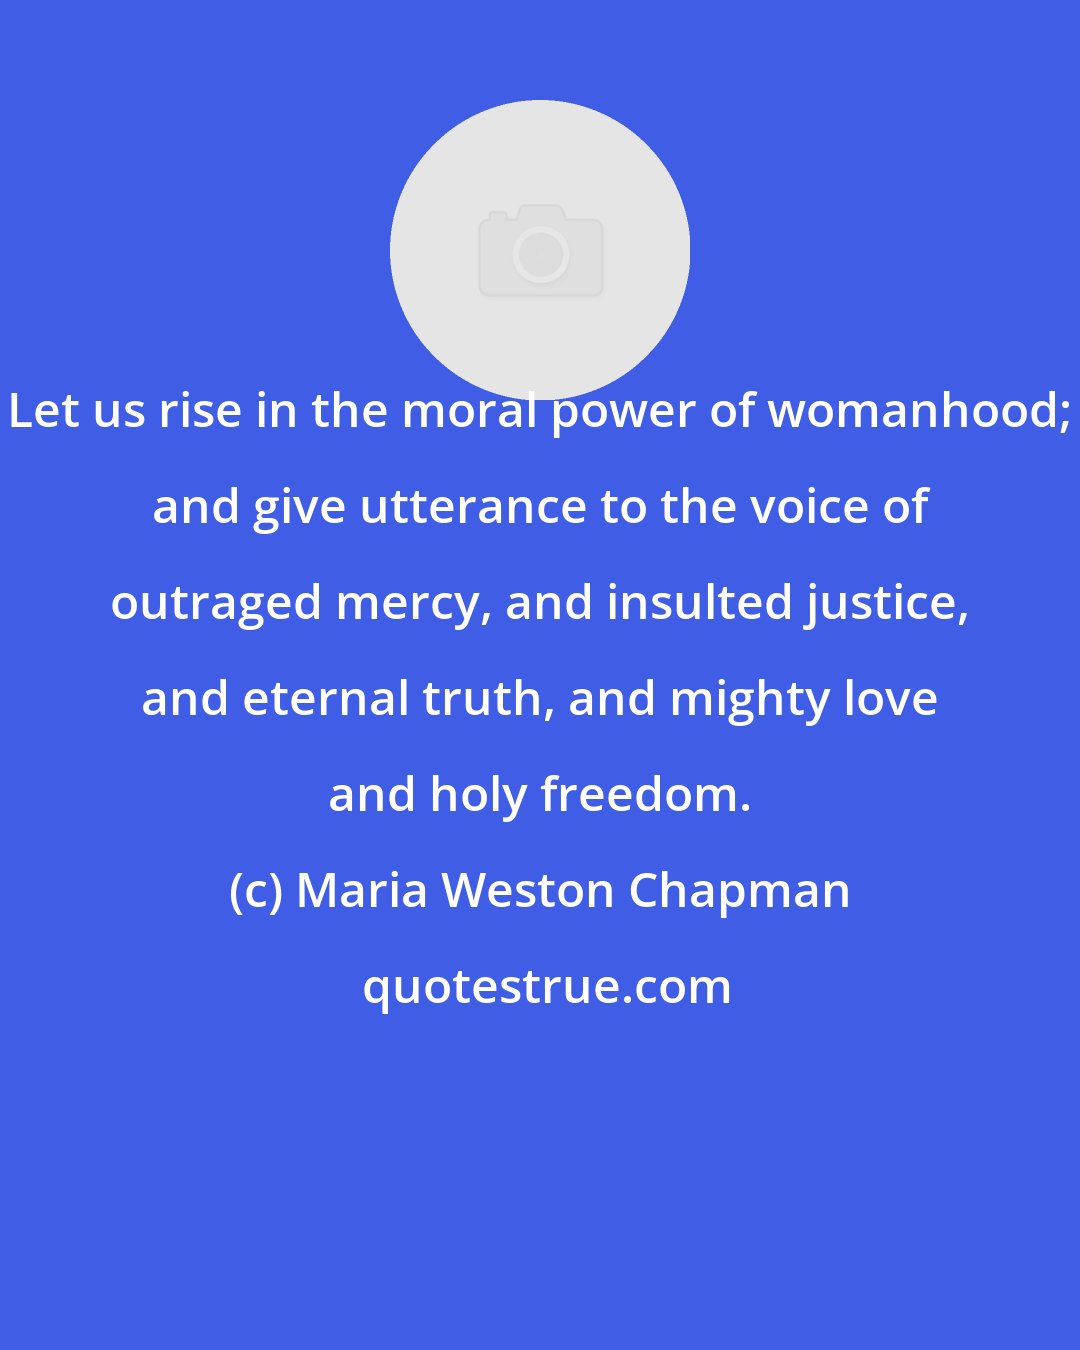 Maria Weston Chapman: Let us rise in the moral power of womanhood; and give utterance to the voice of outraged mercy, and insulted justice, and eternal truth, and mighty love and holy freedom.